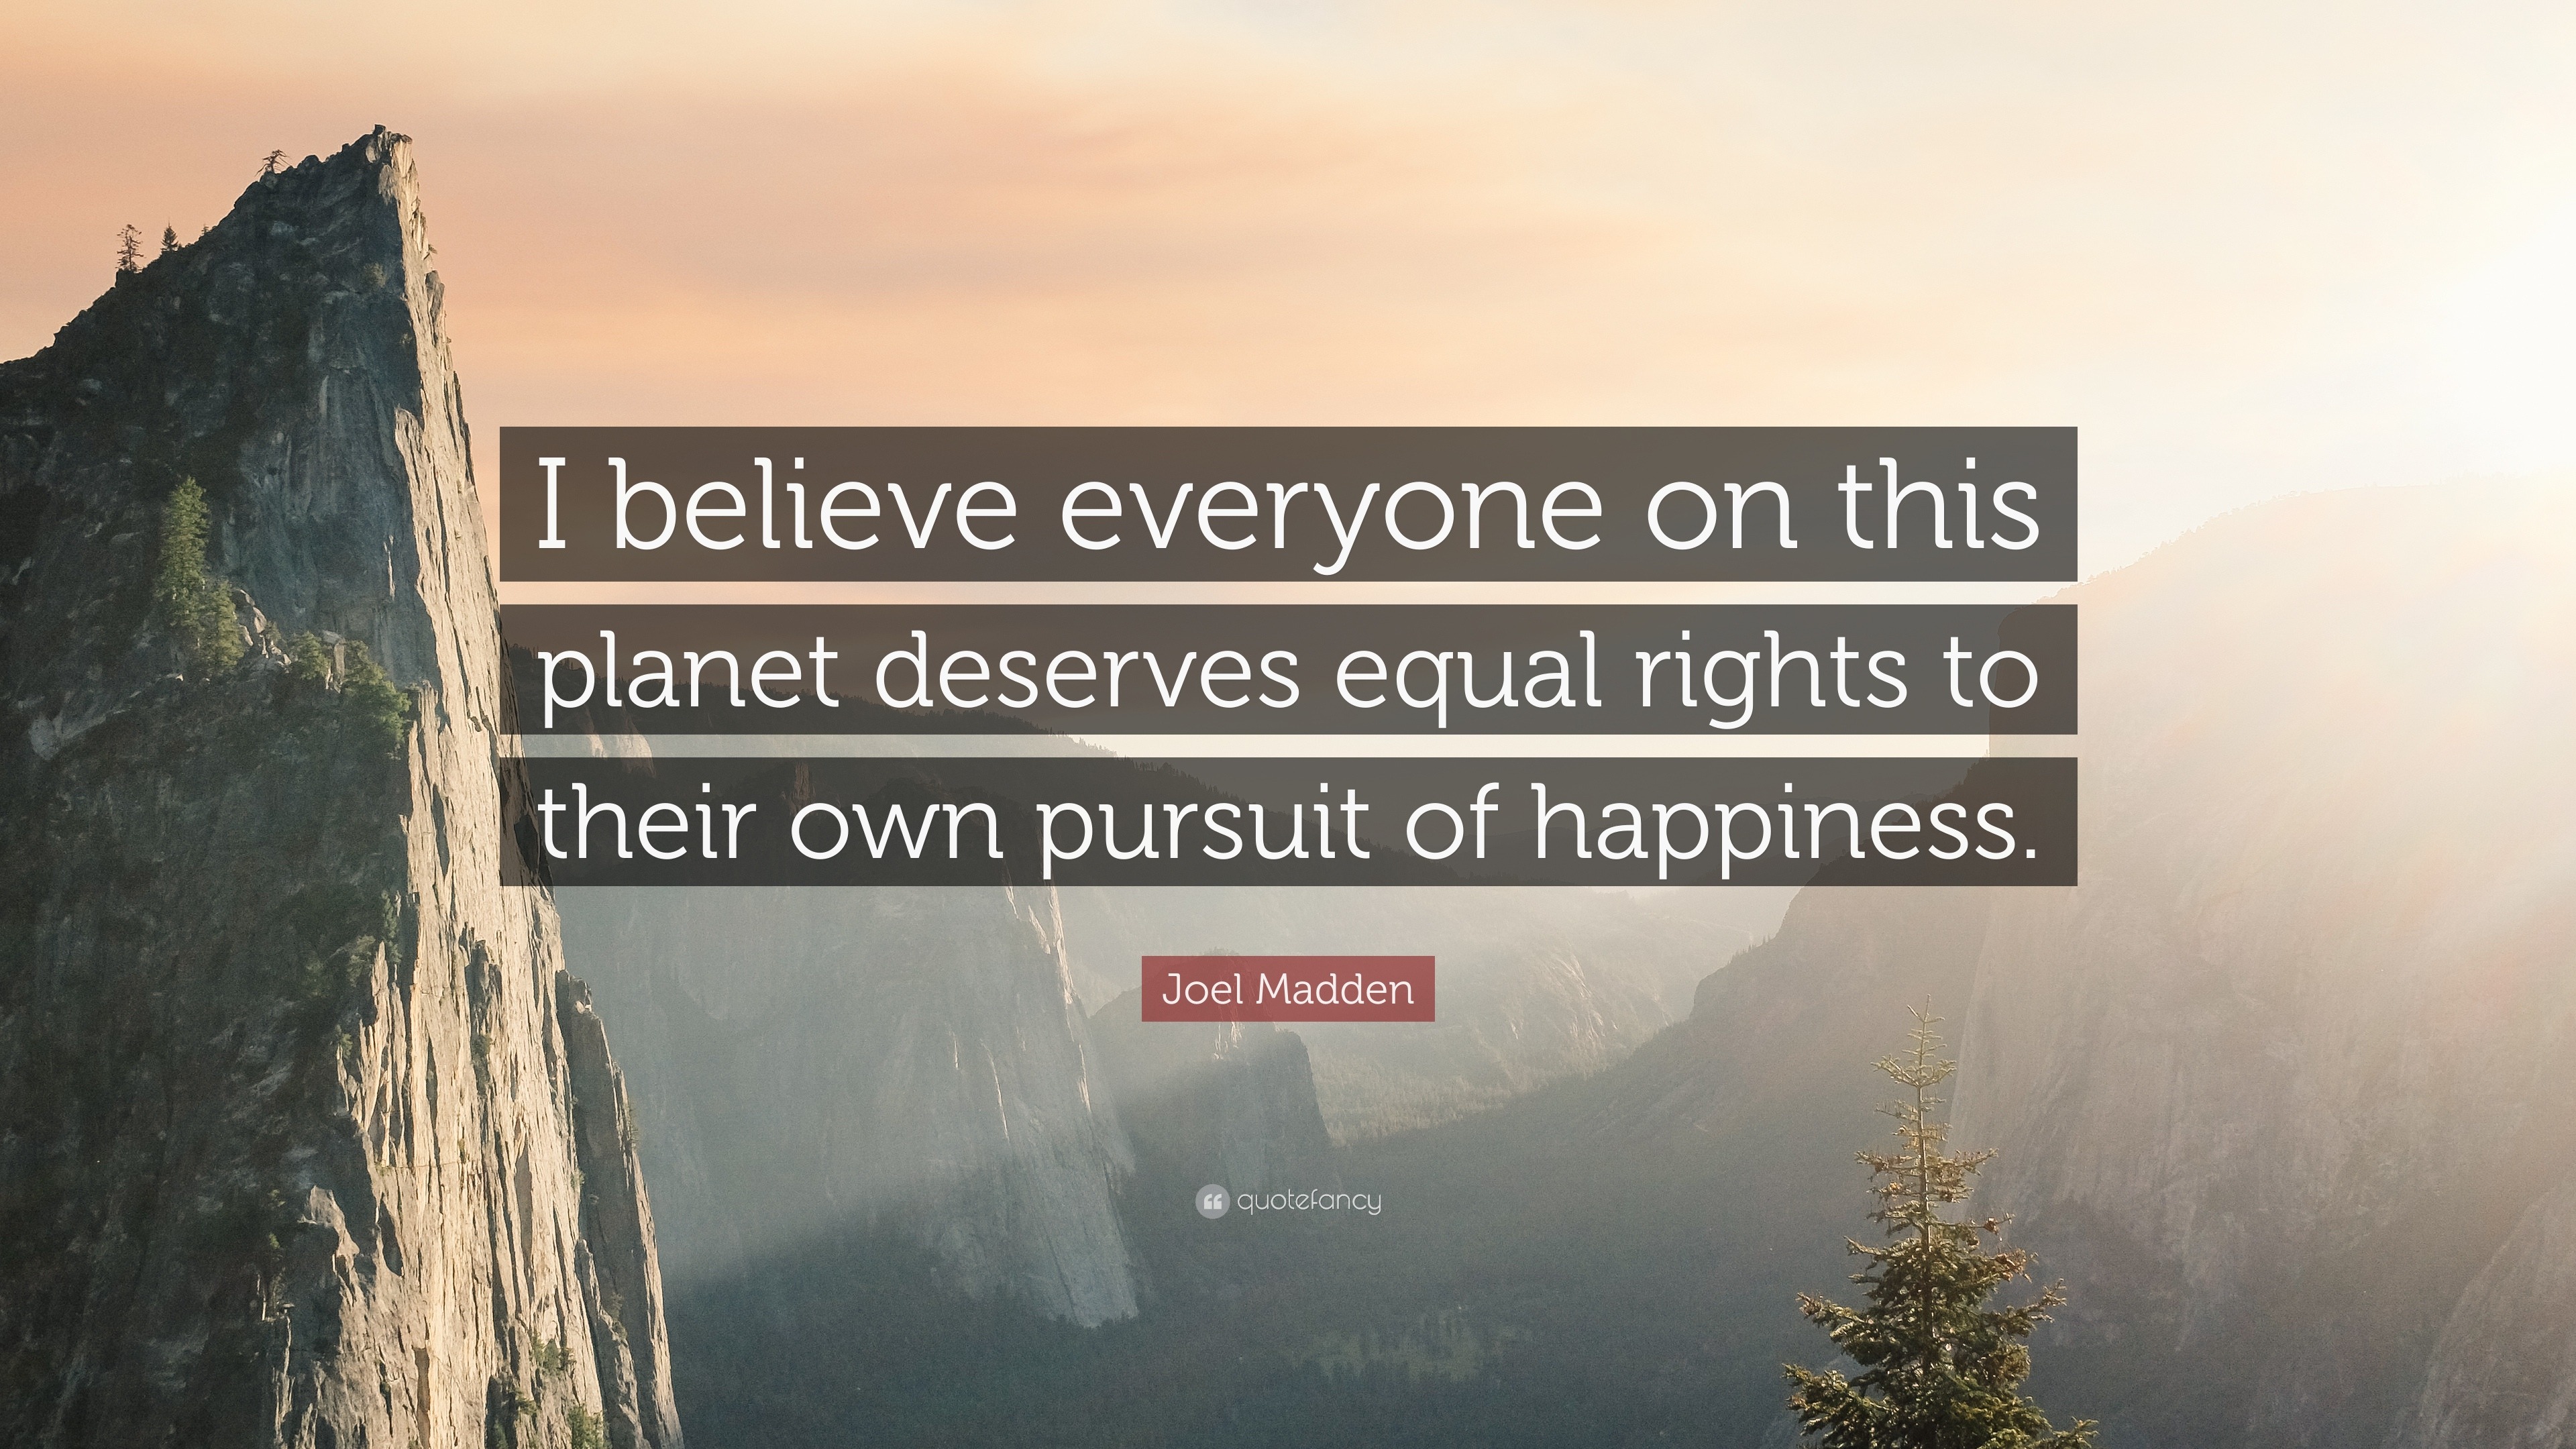 Madden “I believe everyone on this planet deserves equal rights to their own pursuit